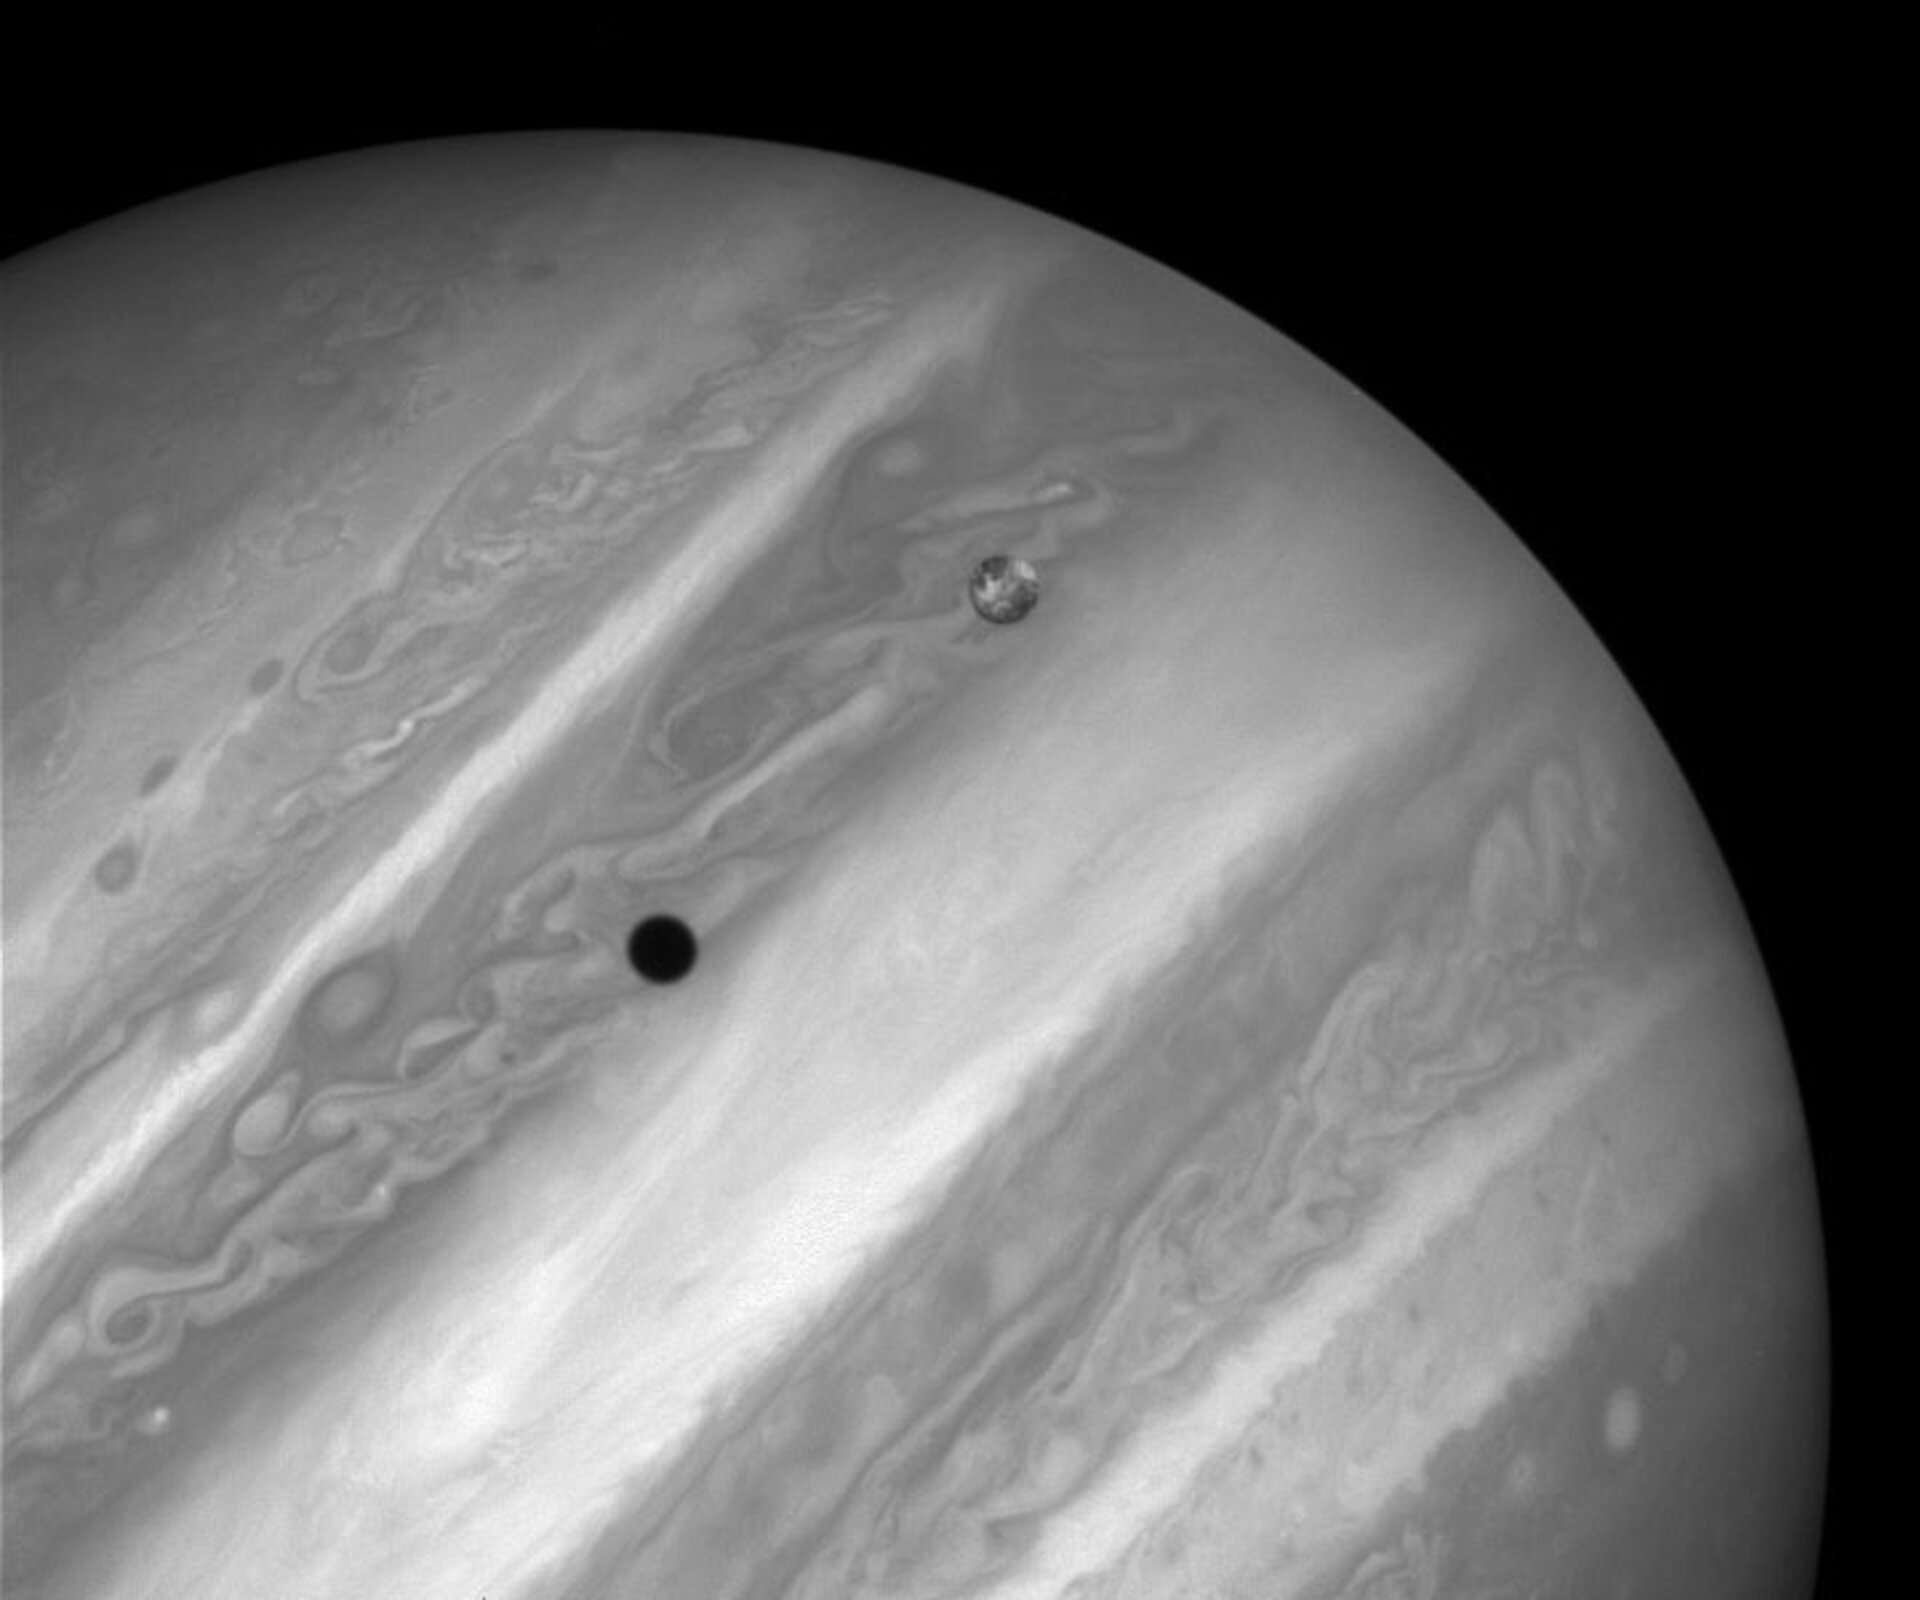 Jupiter's moon Io, passing in front of the planet